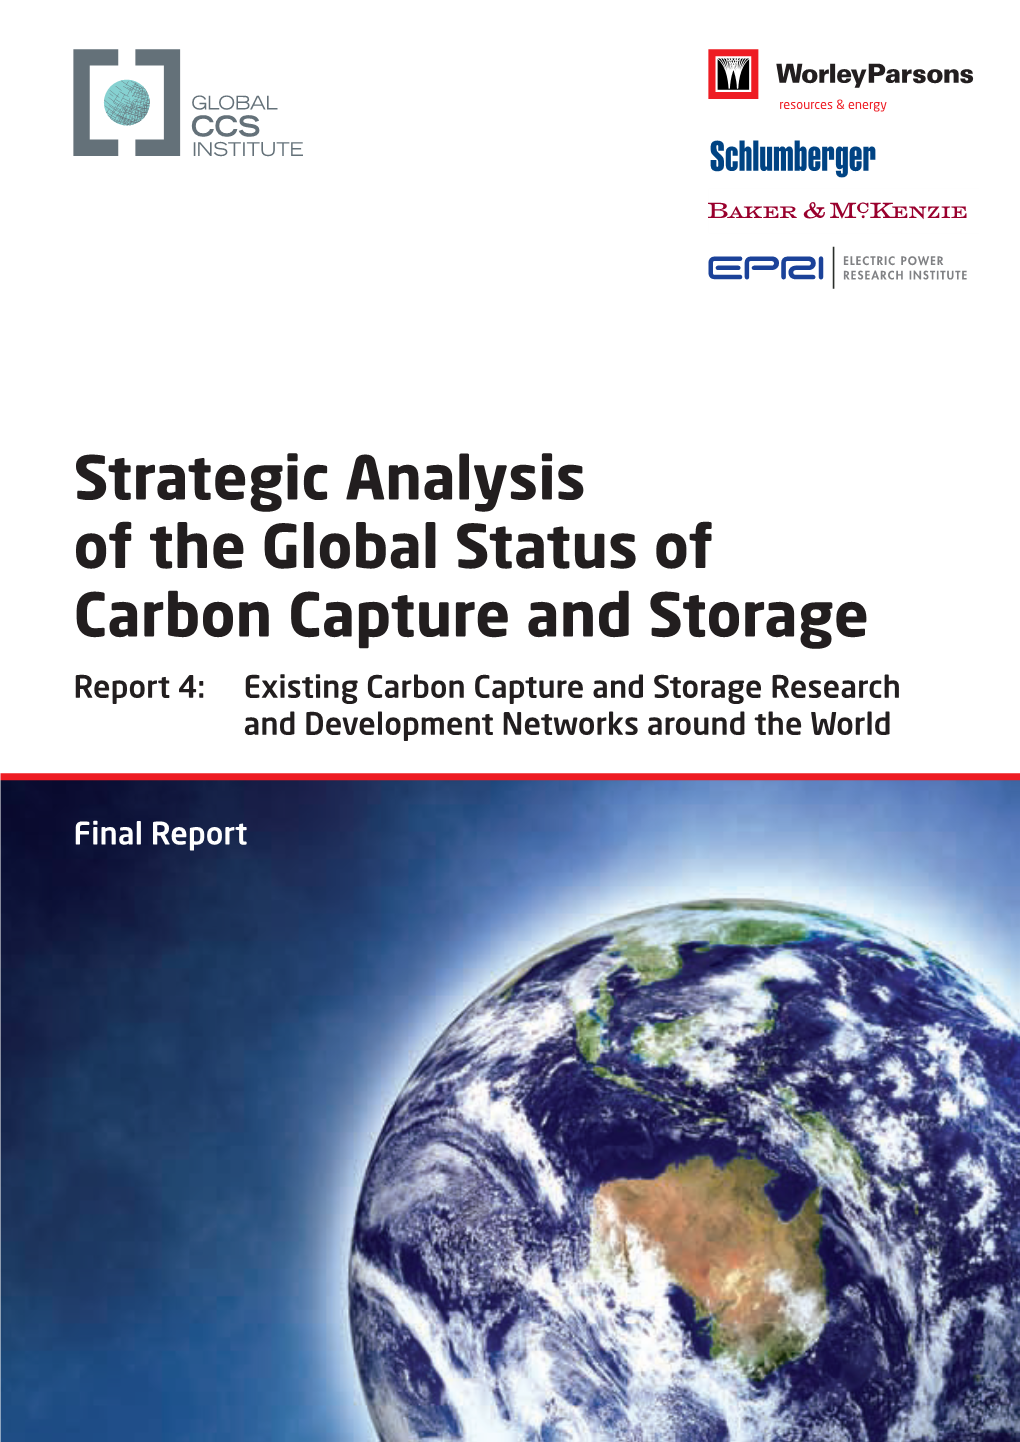 Strategic Analysis of the Global Status of Carbon Capture and Storage Report 4: Existing Carbon Capture and Storage Research and Development Networks Around the World